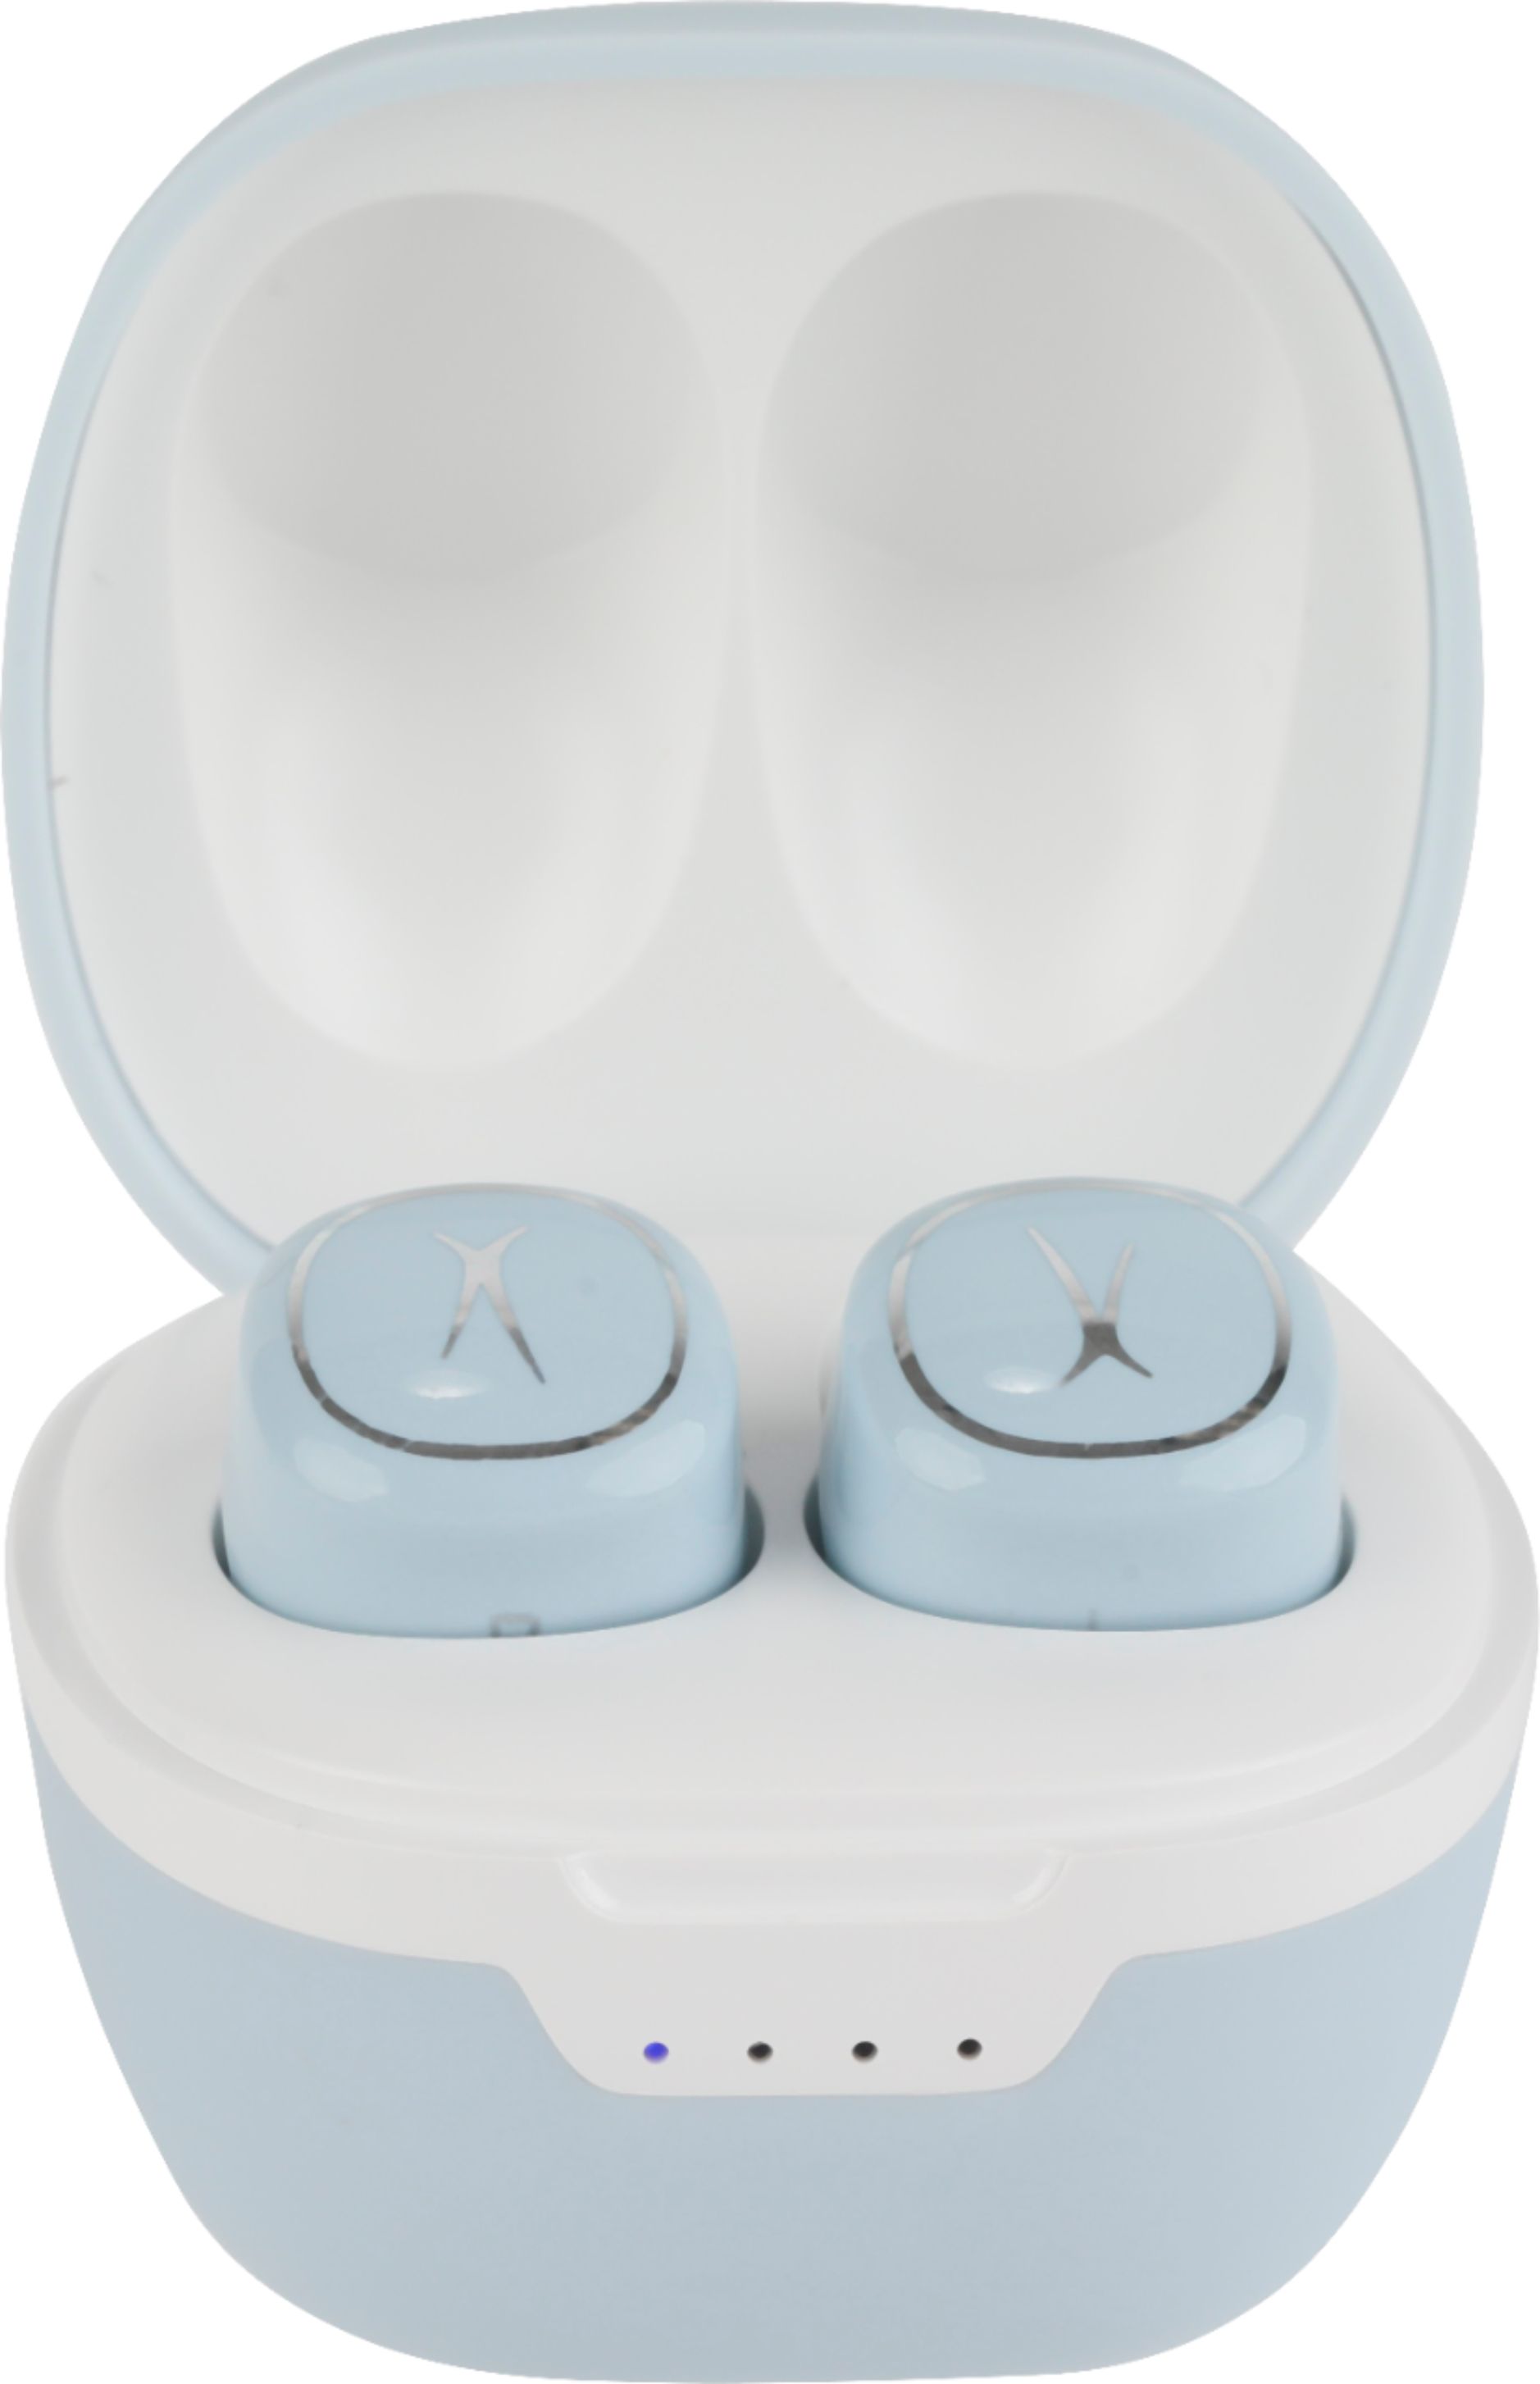 Angle View: Altec Lansing - NanoBuds2.0 True Wireless In-Ear Earbuds - Blue